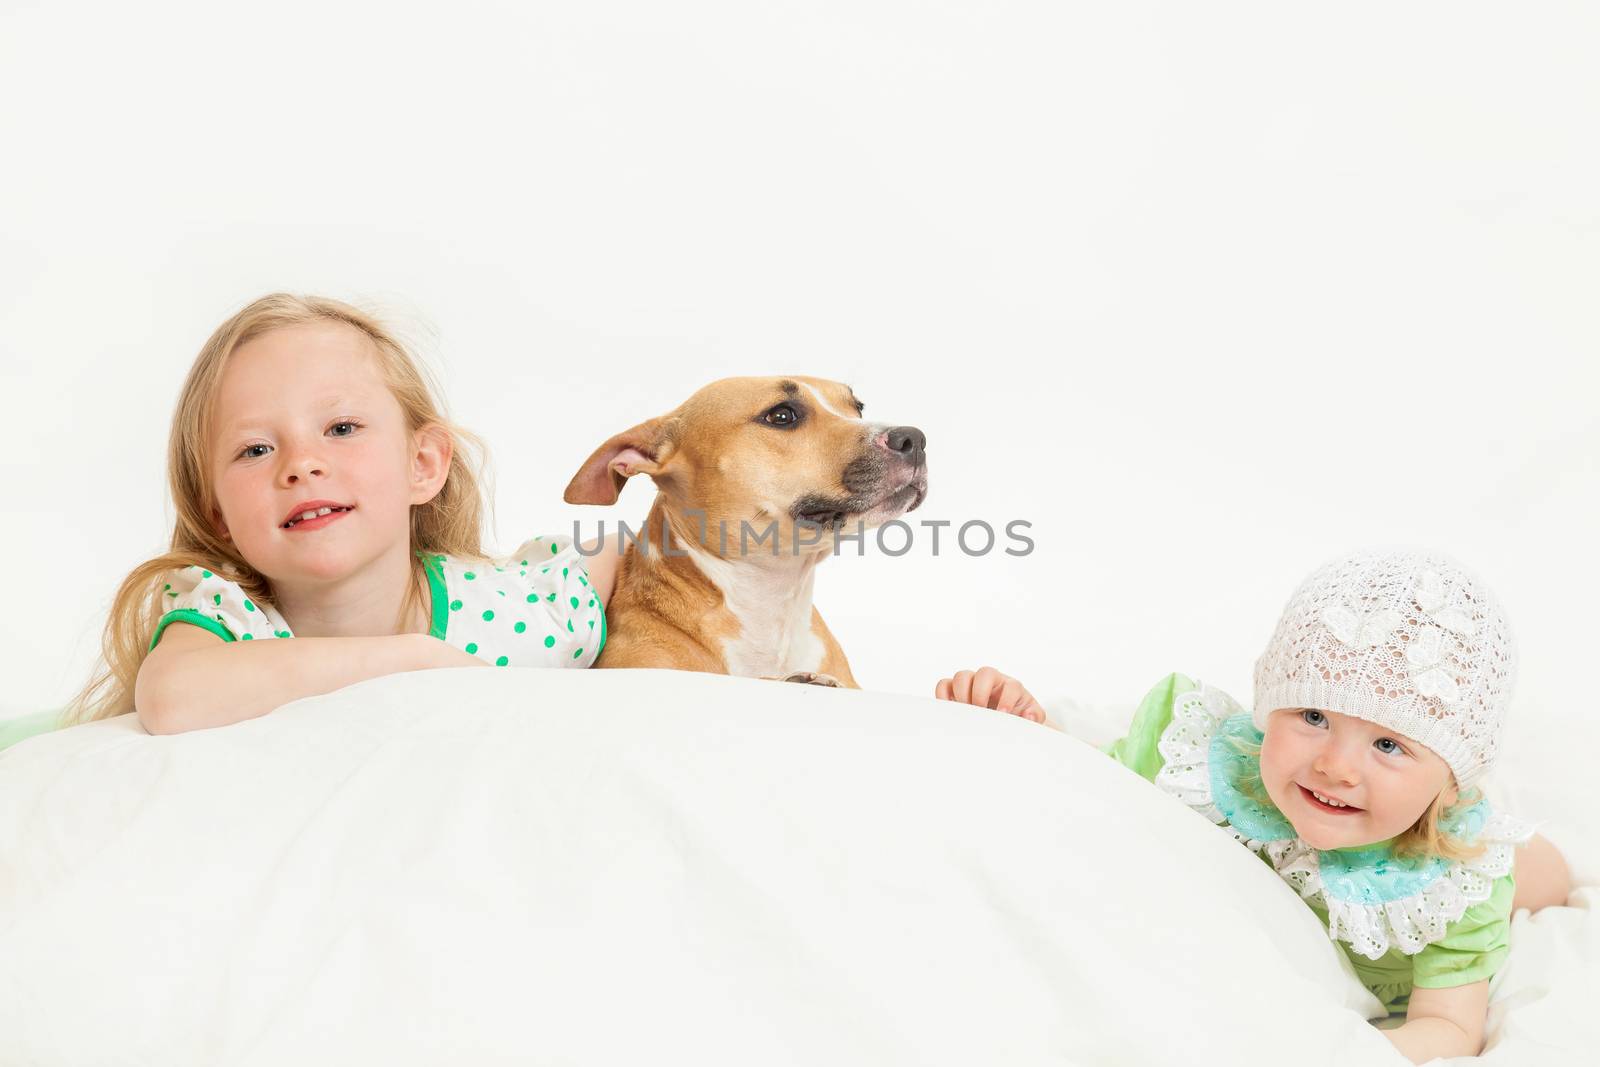 two little girls and dog on the isolated background